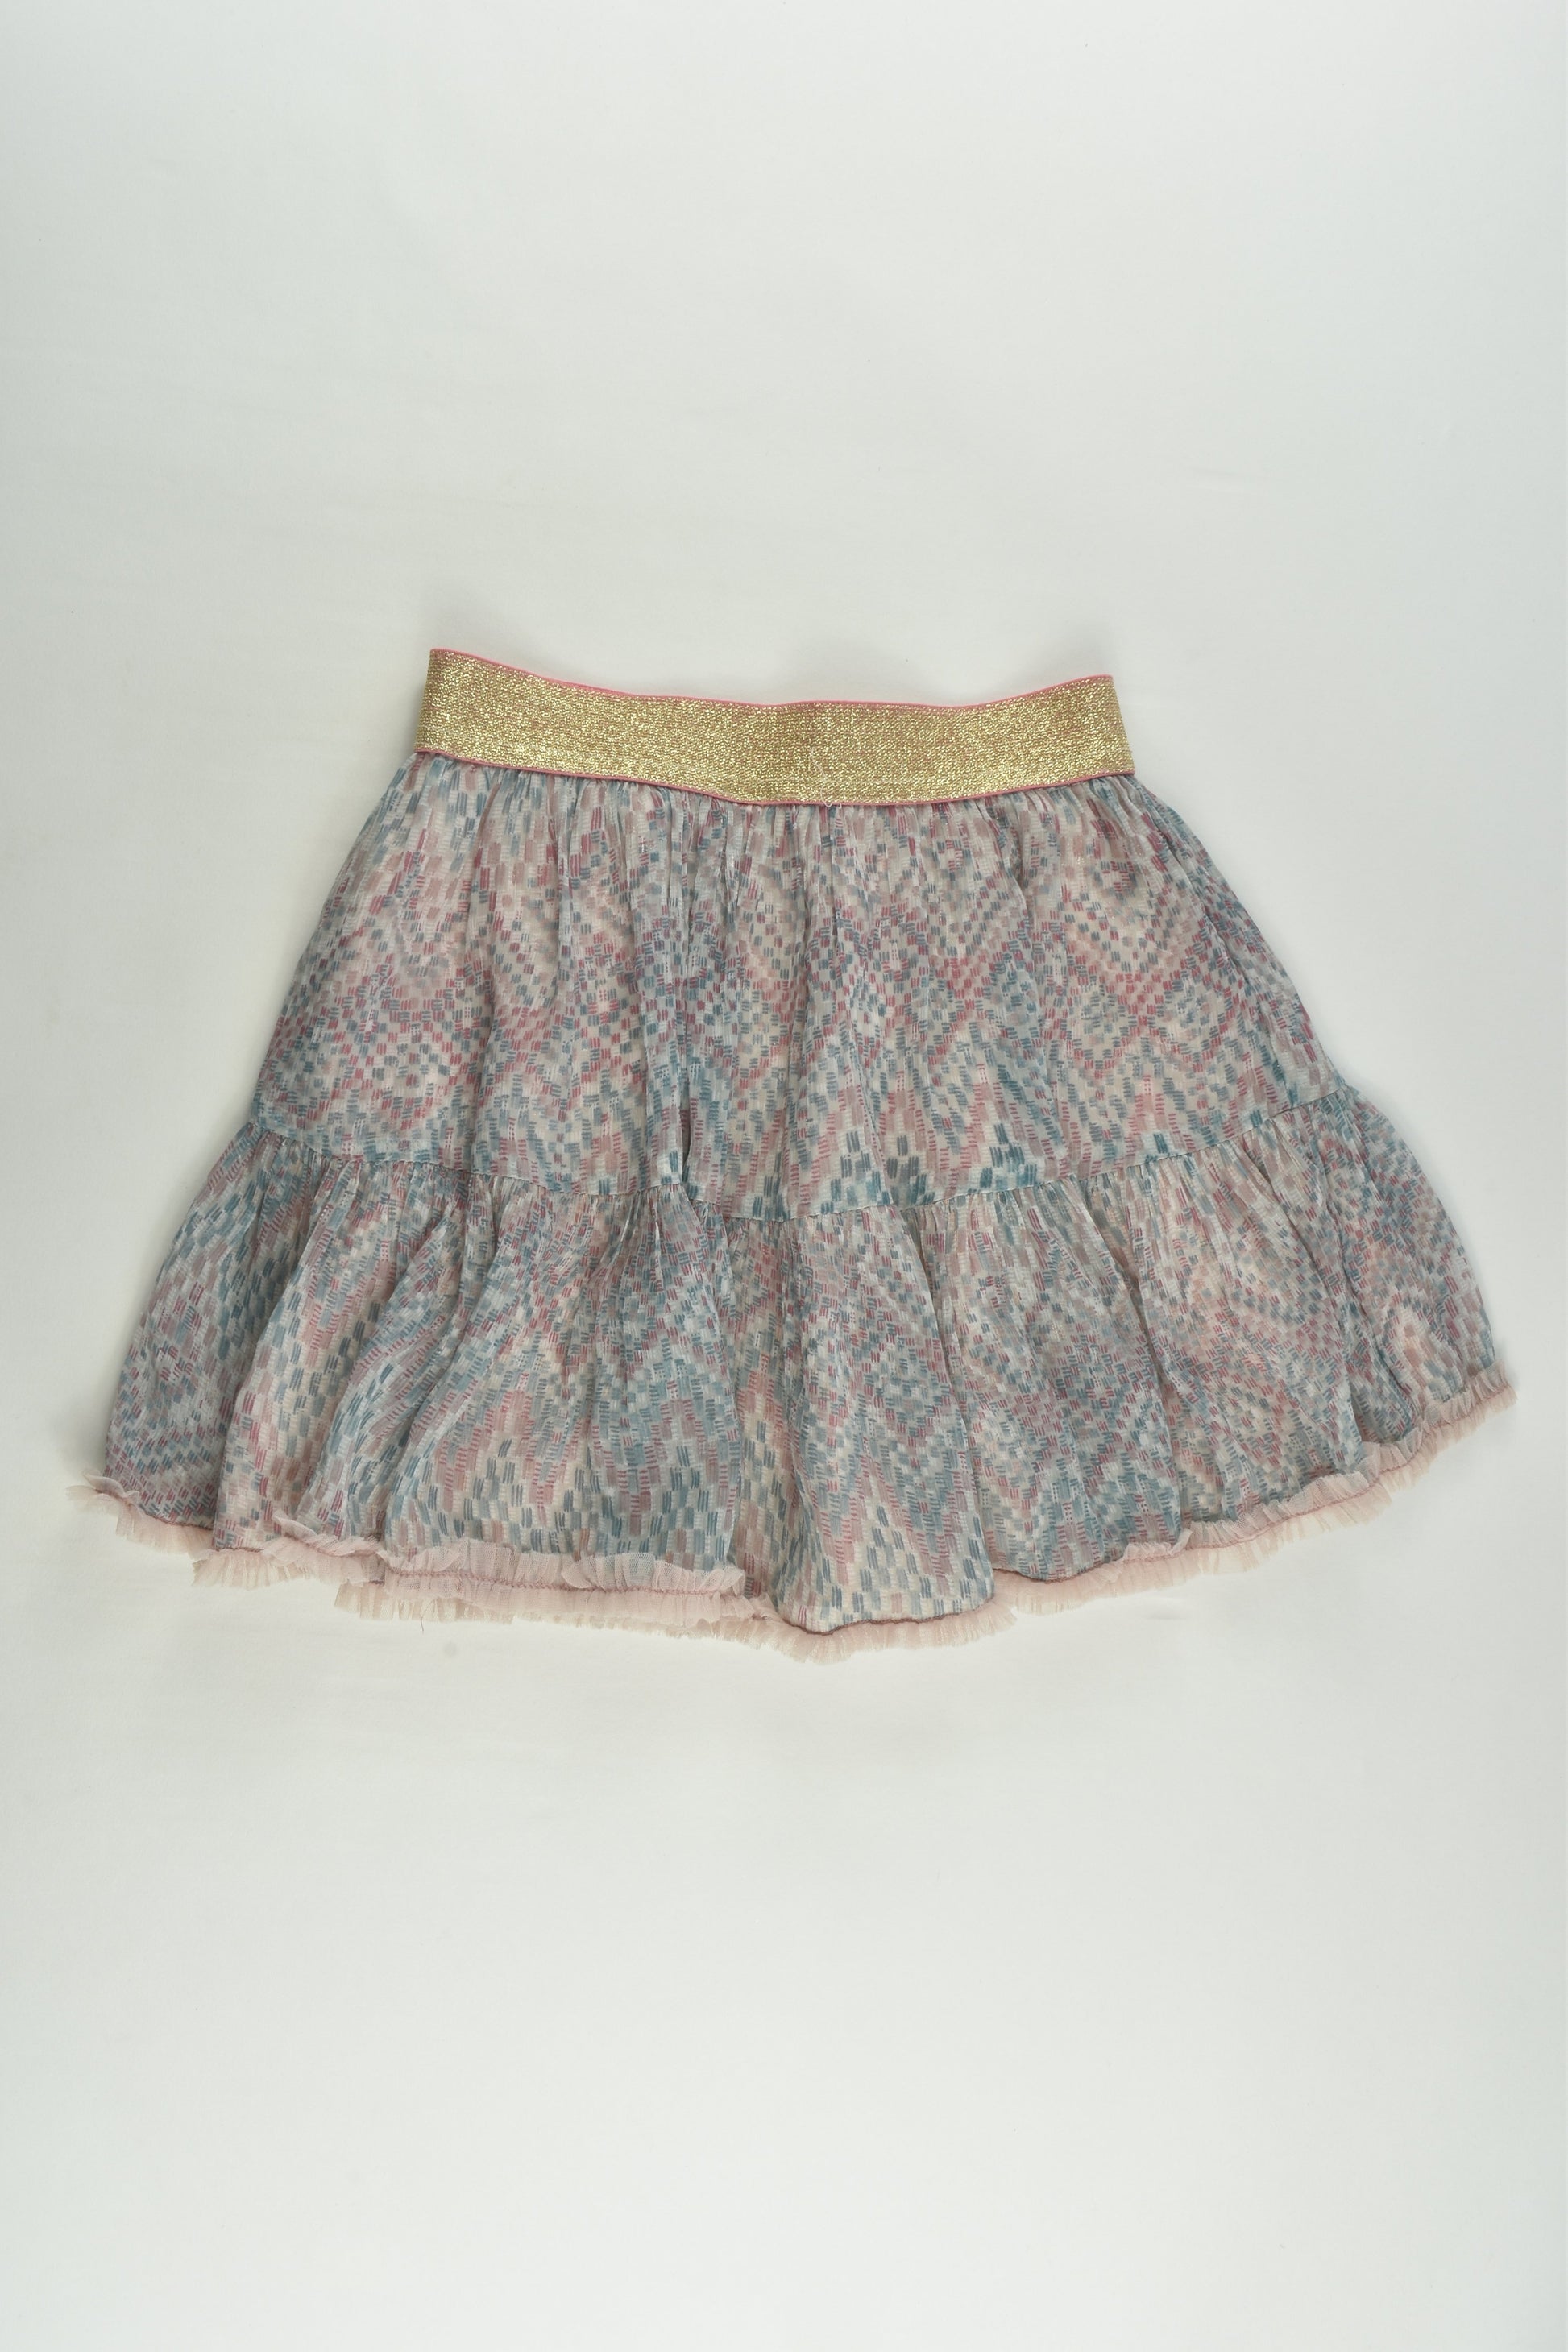 Monsoon Size 5-6 Lined Skirt